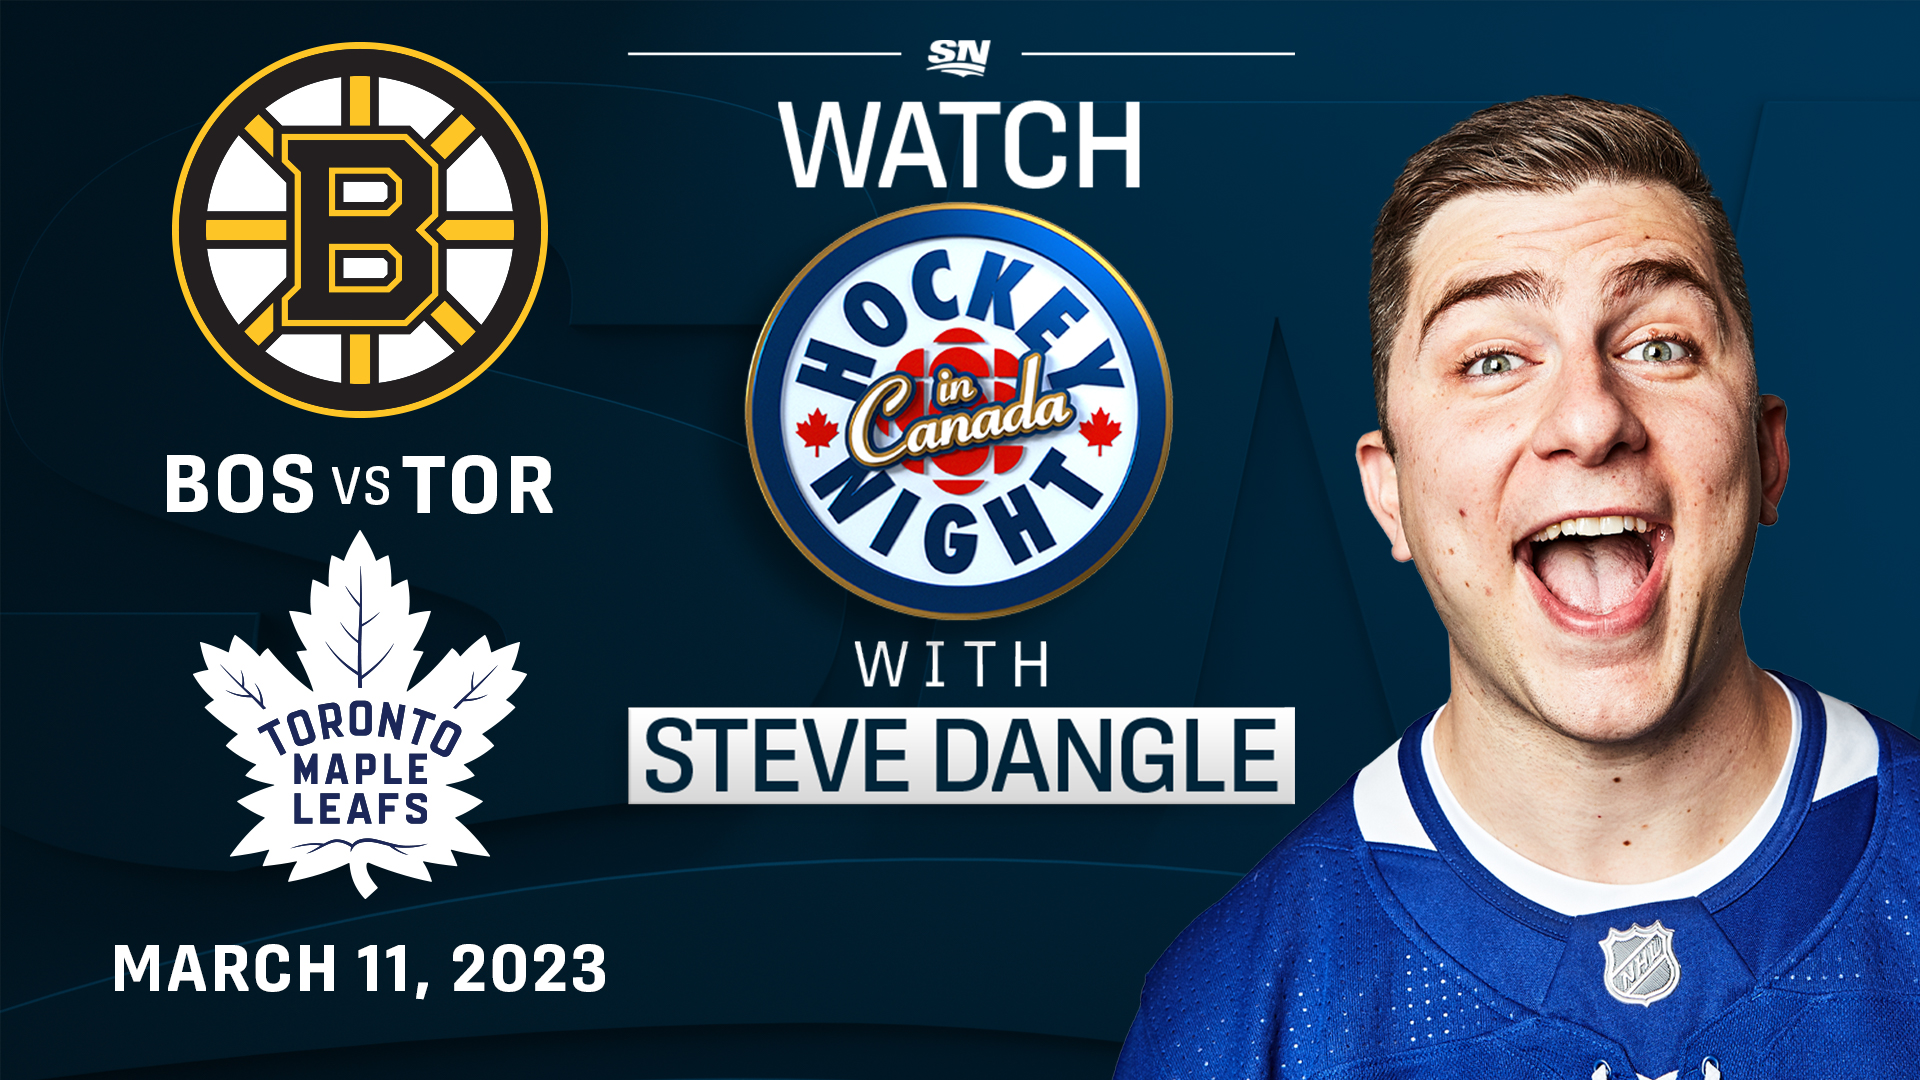 Watch Hockey Night in Canada with Steve Dangle presented by Coca-Cola